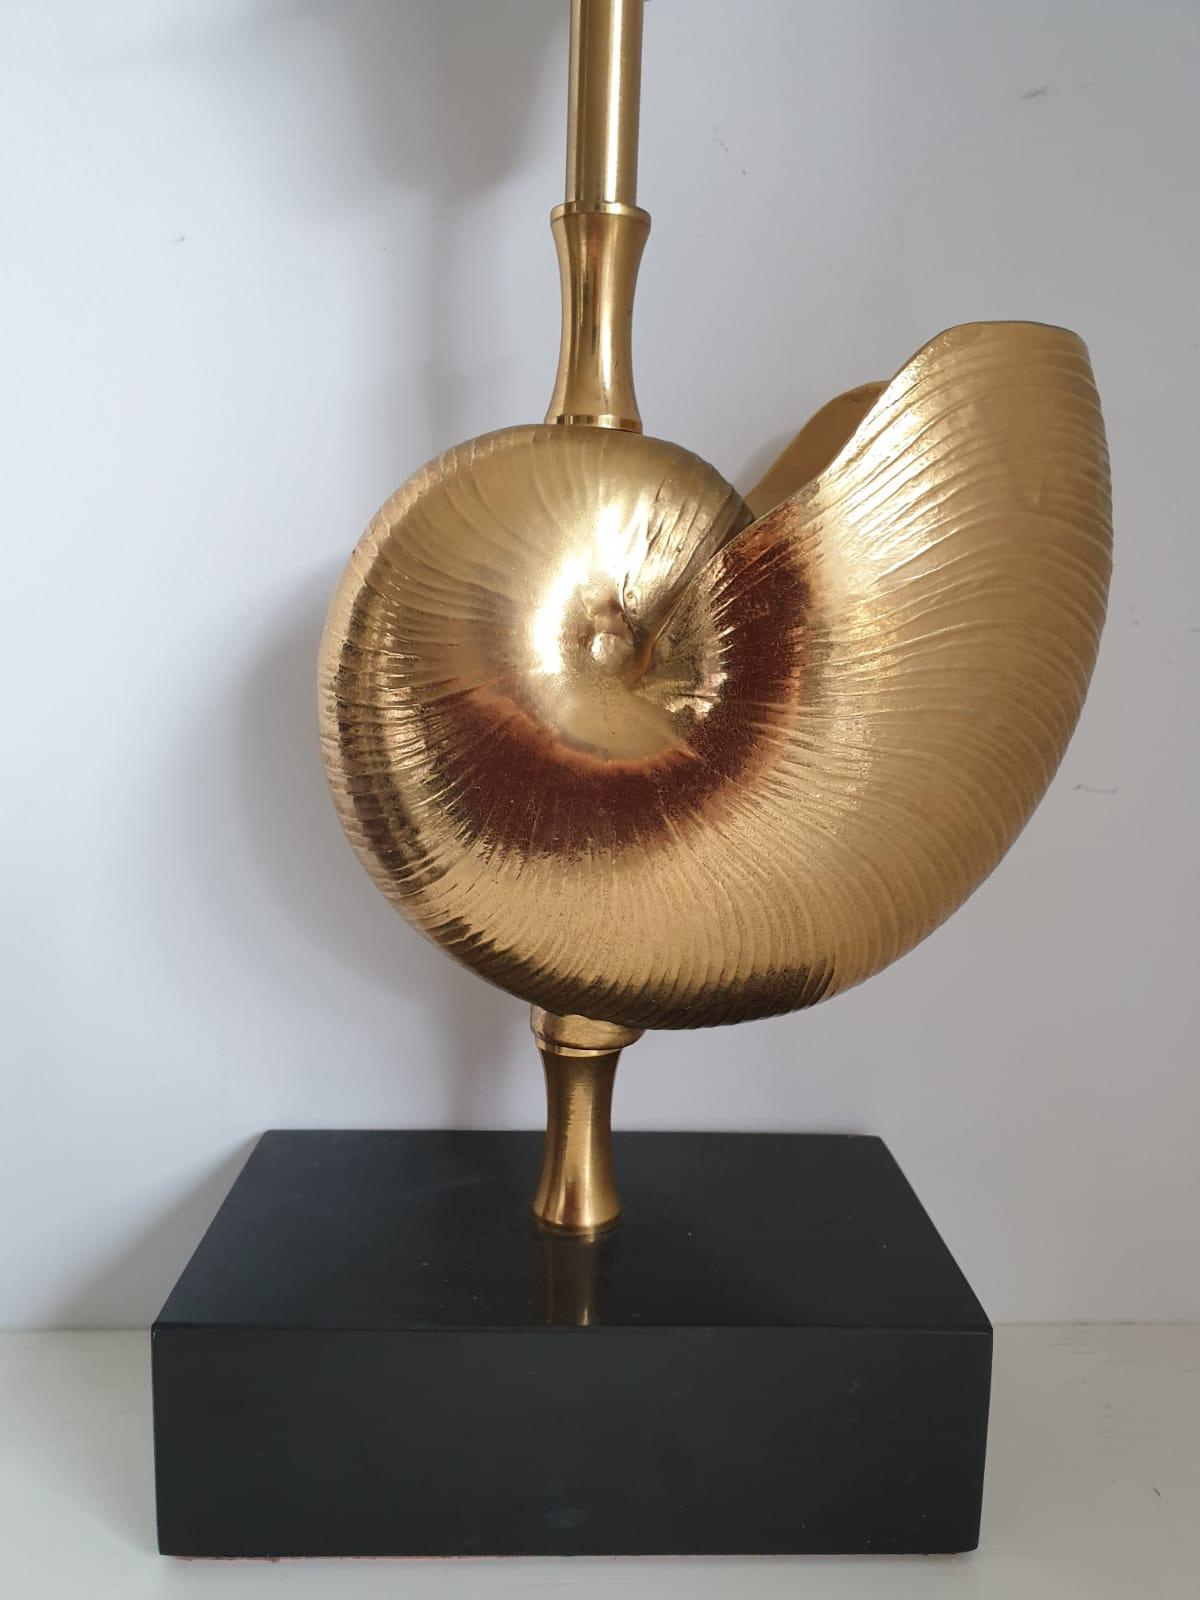 Well sized bronze table lamp with shell design sitting on a marble base.